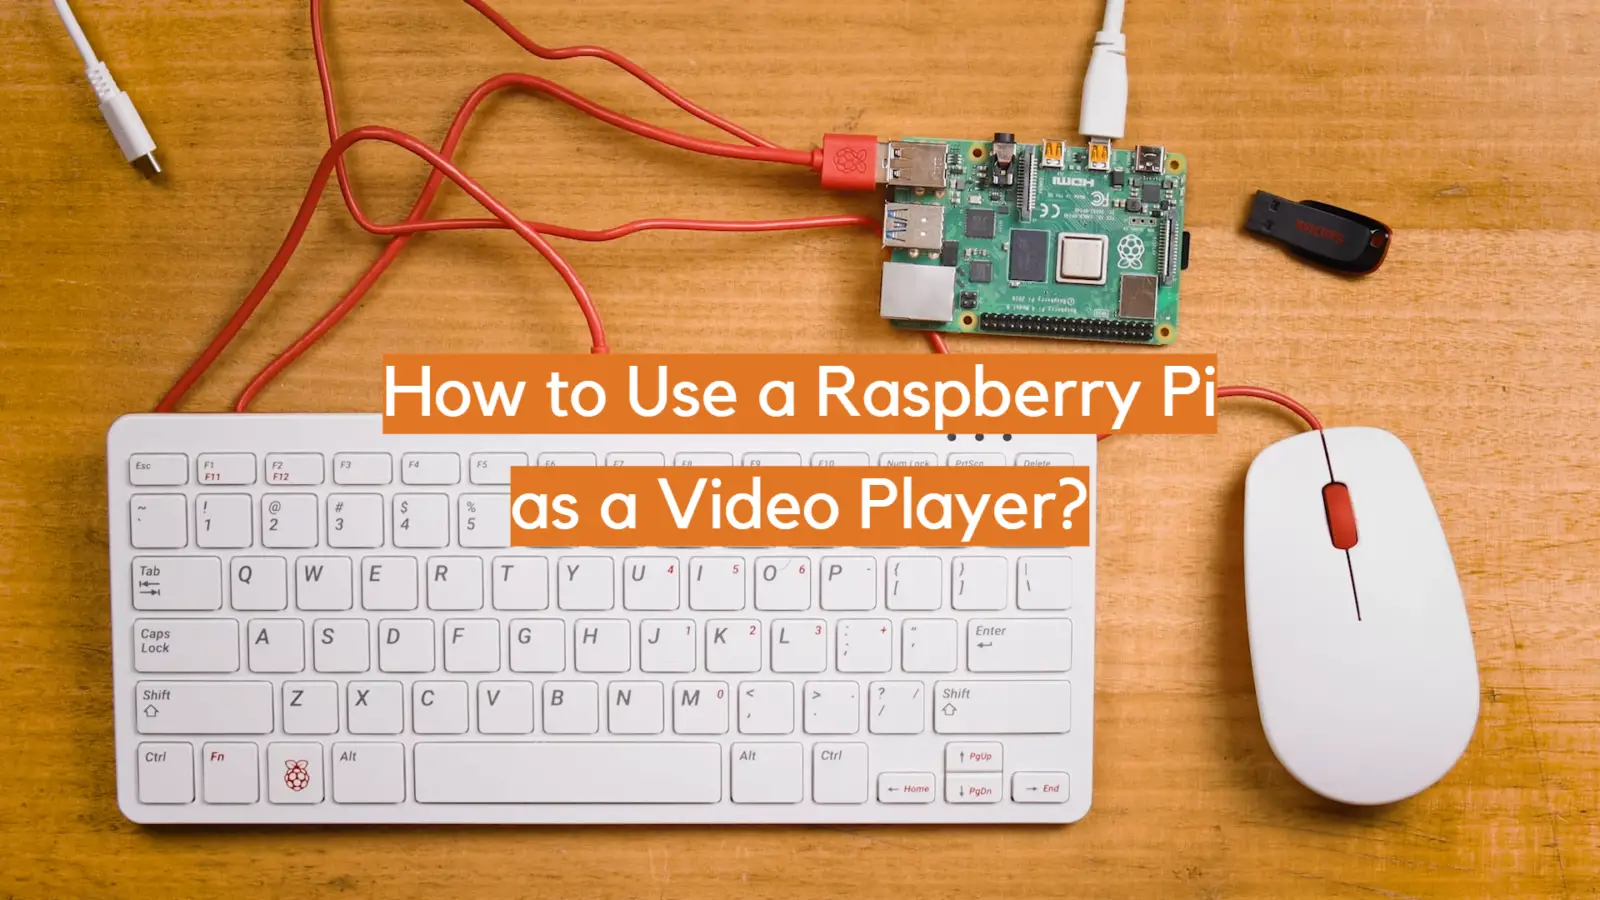 How to Use a Raspberry Pi as a Video Player?